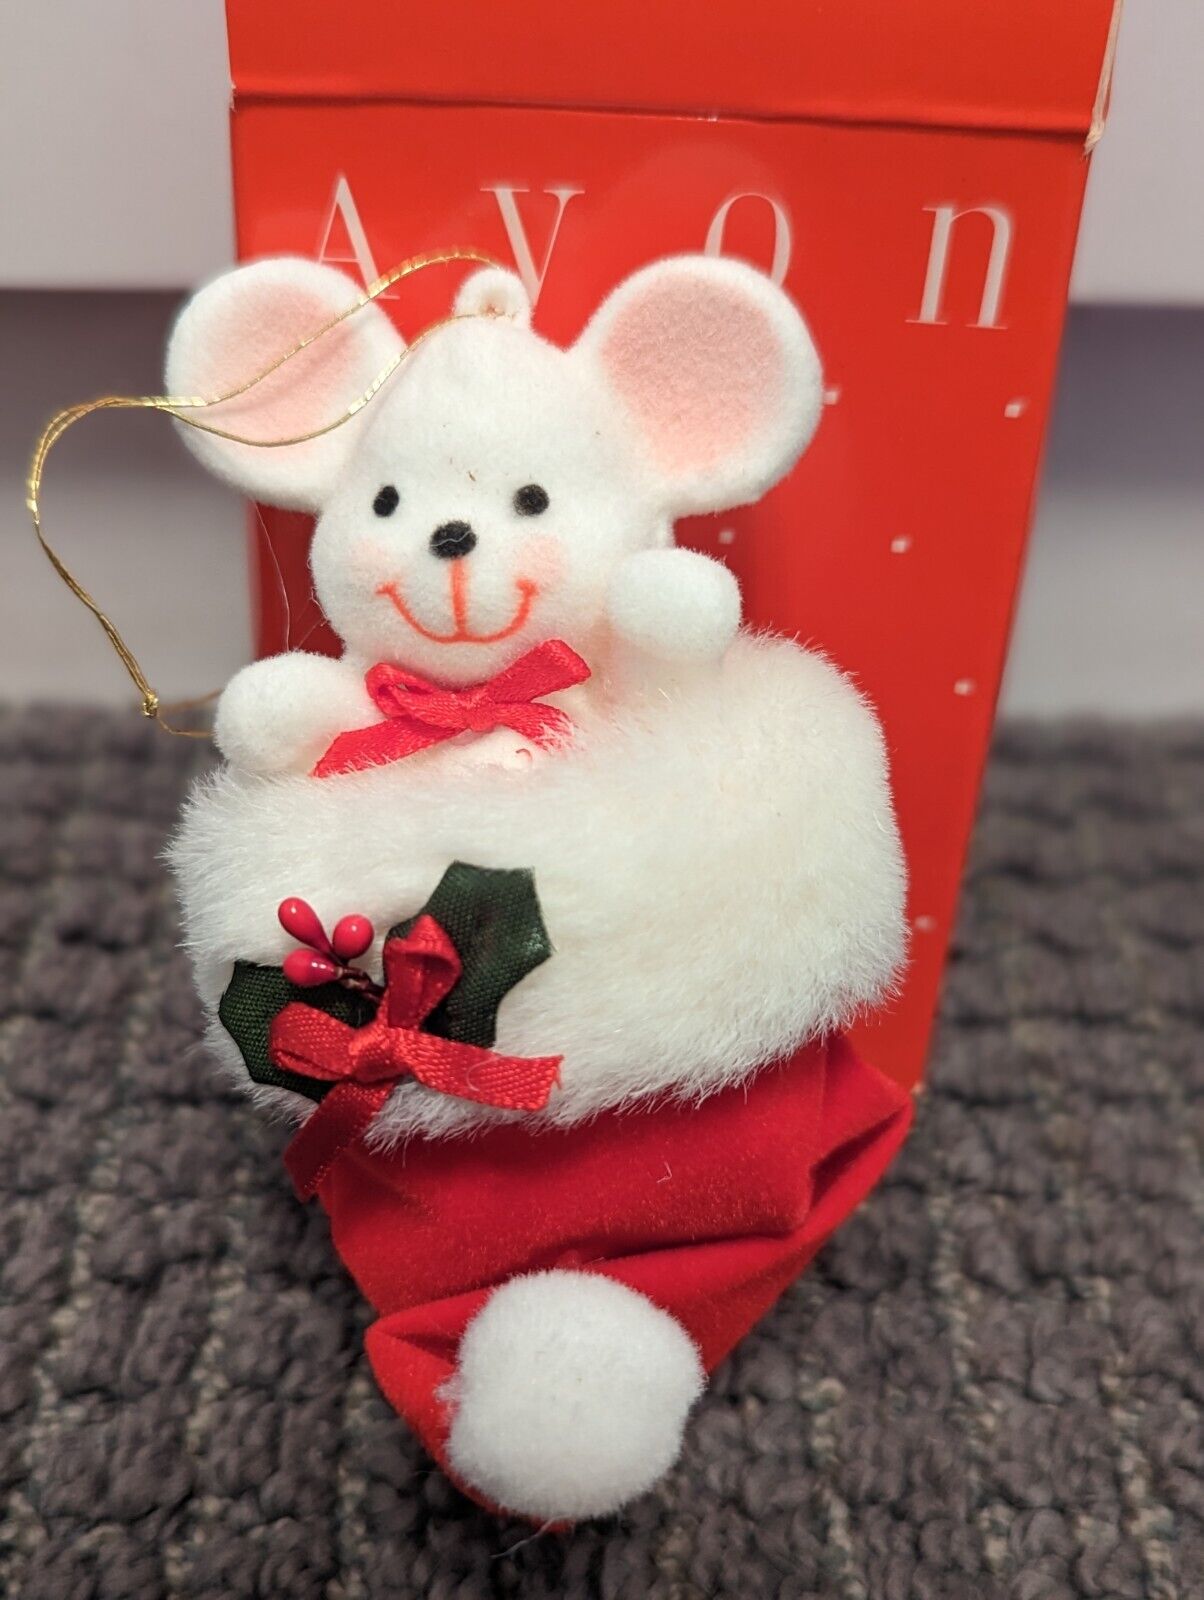 NEW Avon Gift Collection Peek-a-Boo Mouse Ornament VINTAGE